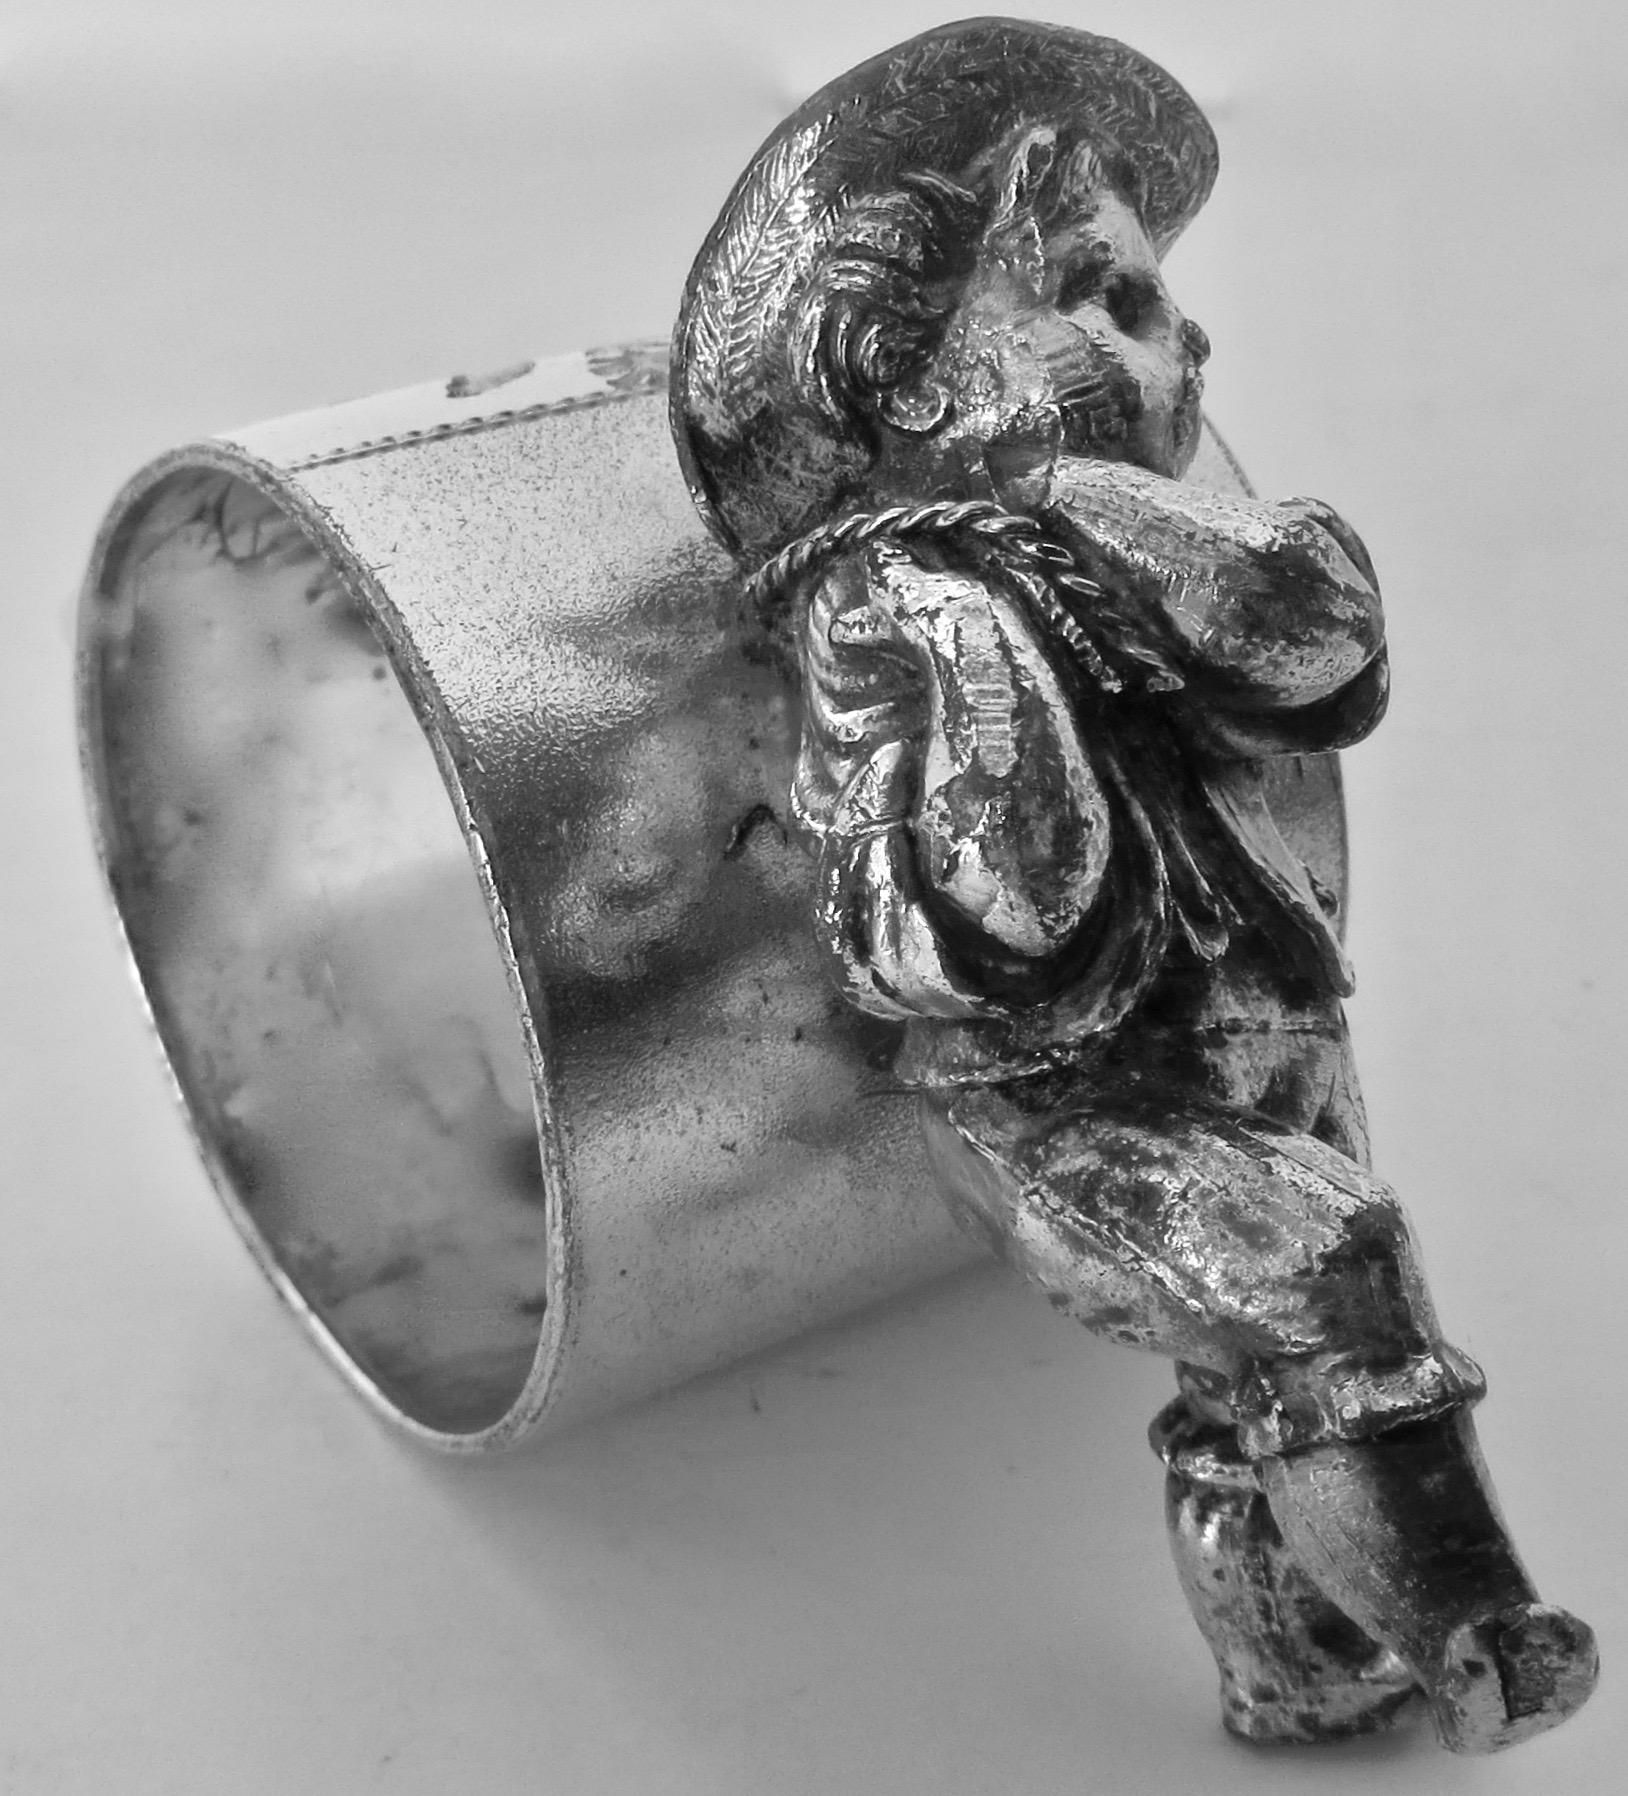 Though unmarked, this napkin ring was most certainly made by The Meriden Britannia Co. and came in two versions; one with a platform beneath the boy; this example has the young boy resting one foot on the ground pulling on the napkin ring. It is